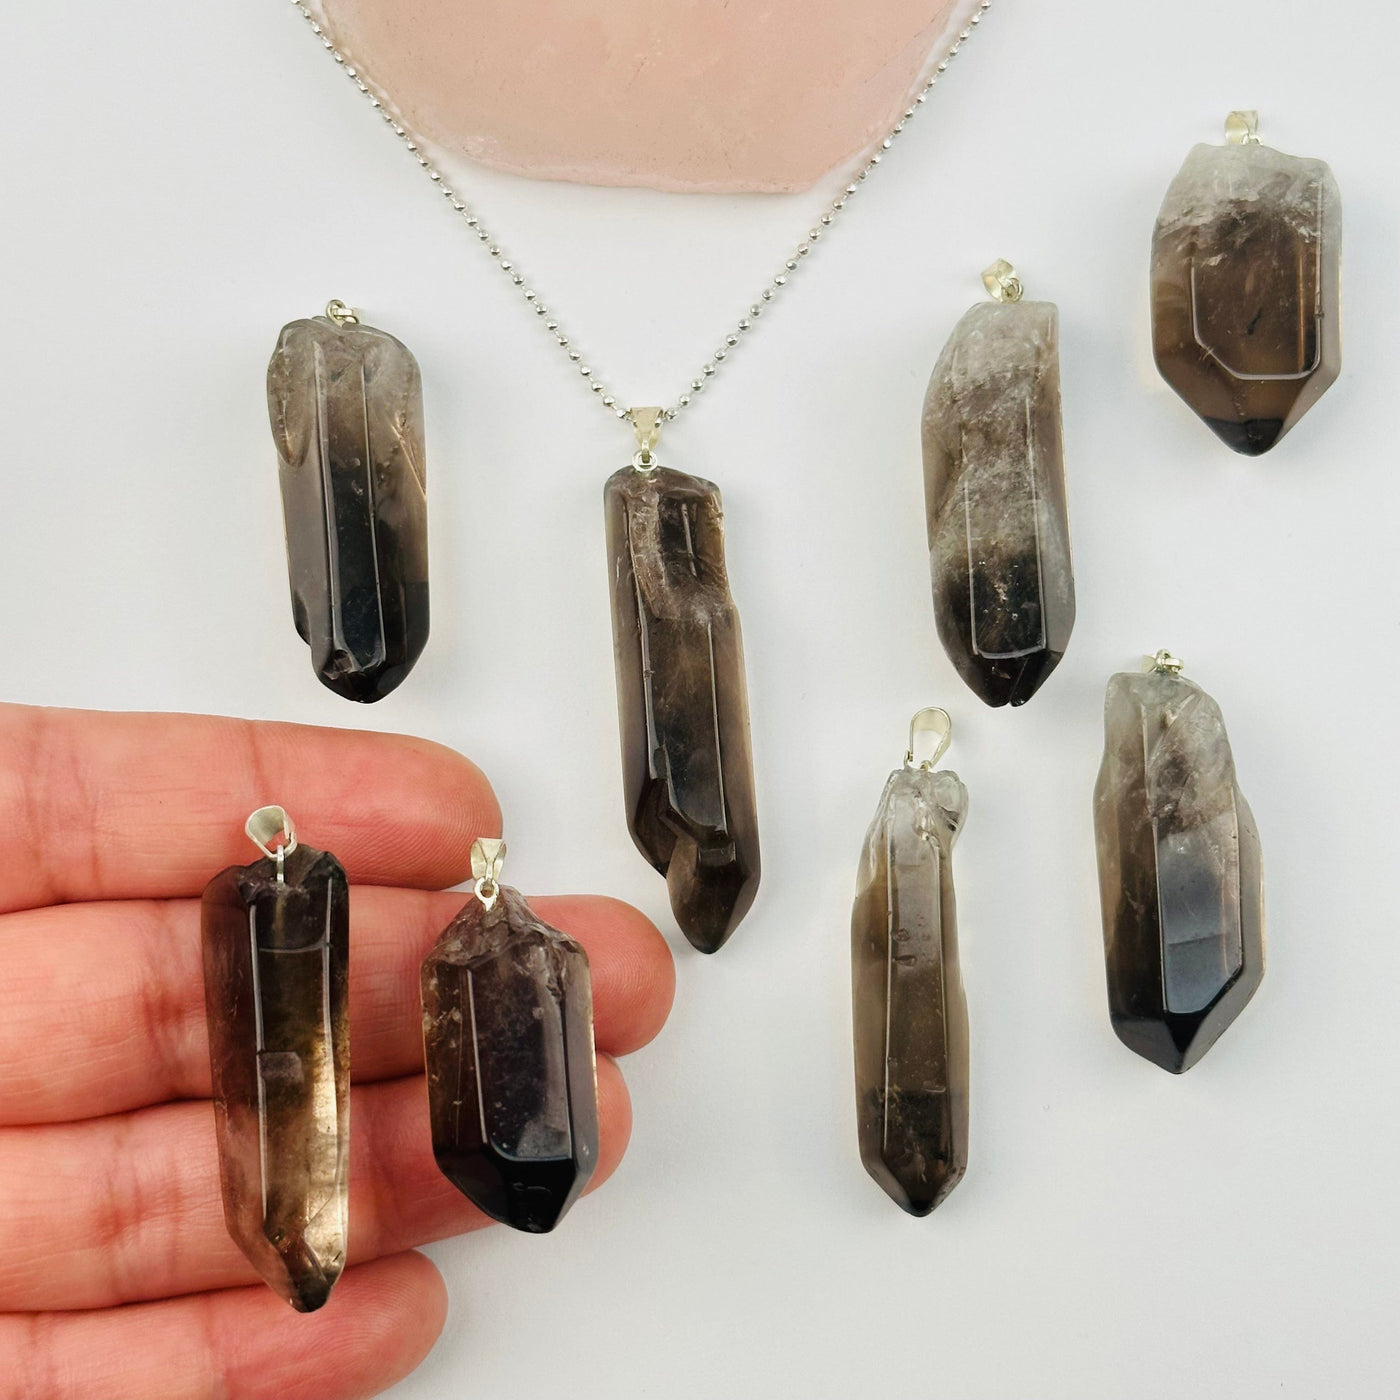 Smoky Quartz Polished Point Pendant Charm - Silver Bail in hand for size reference 